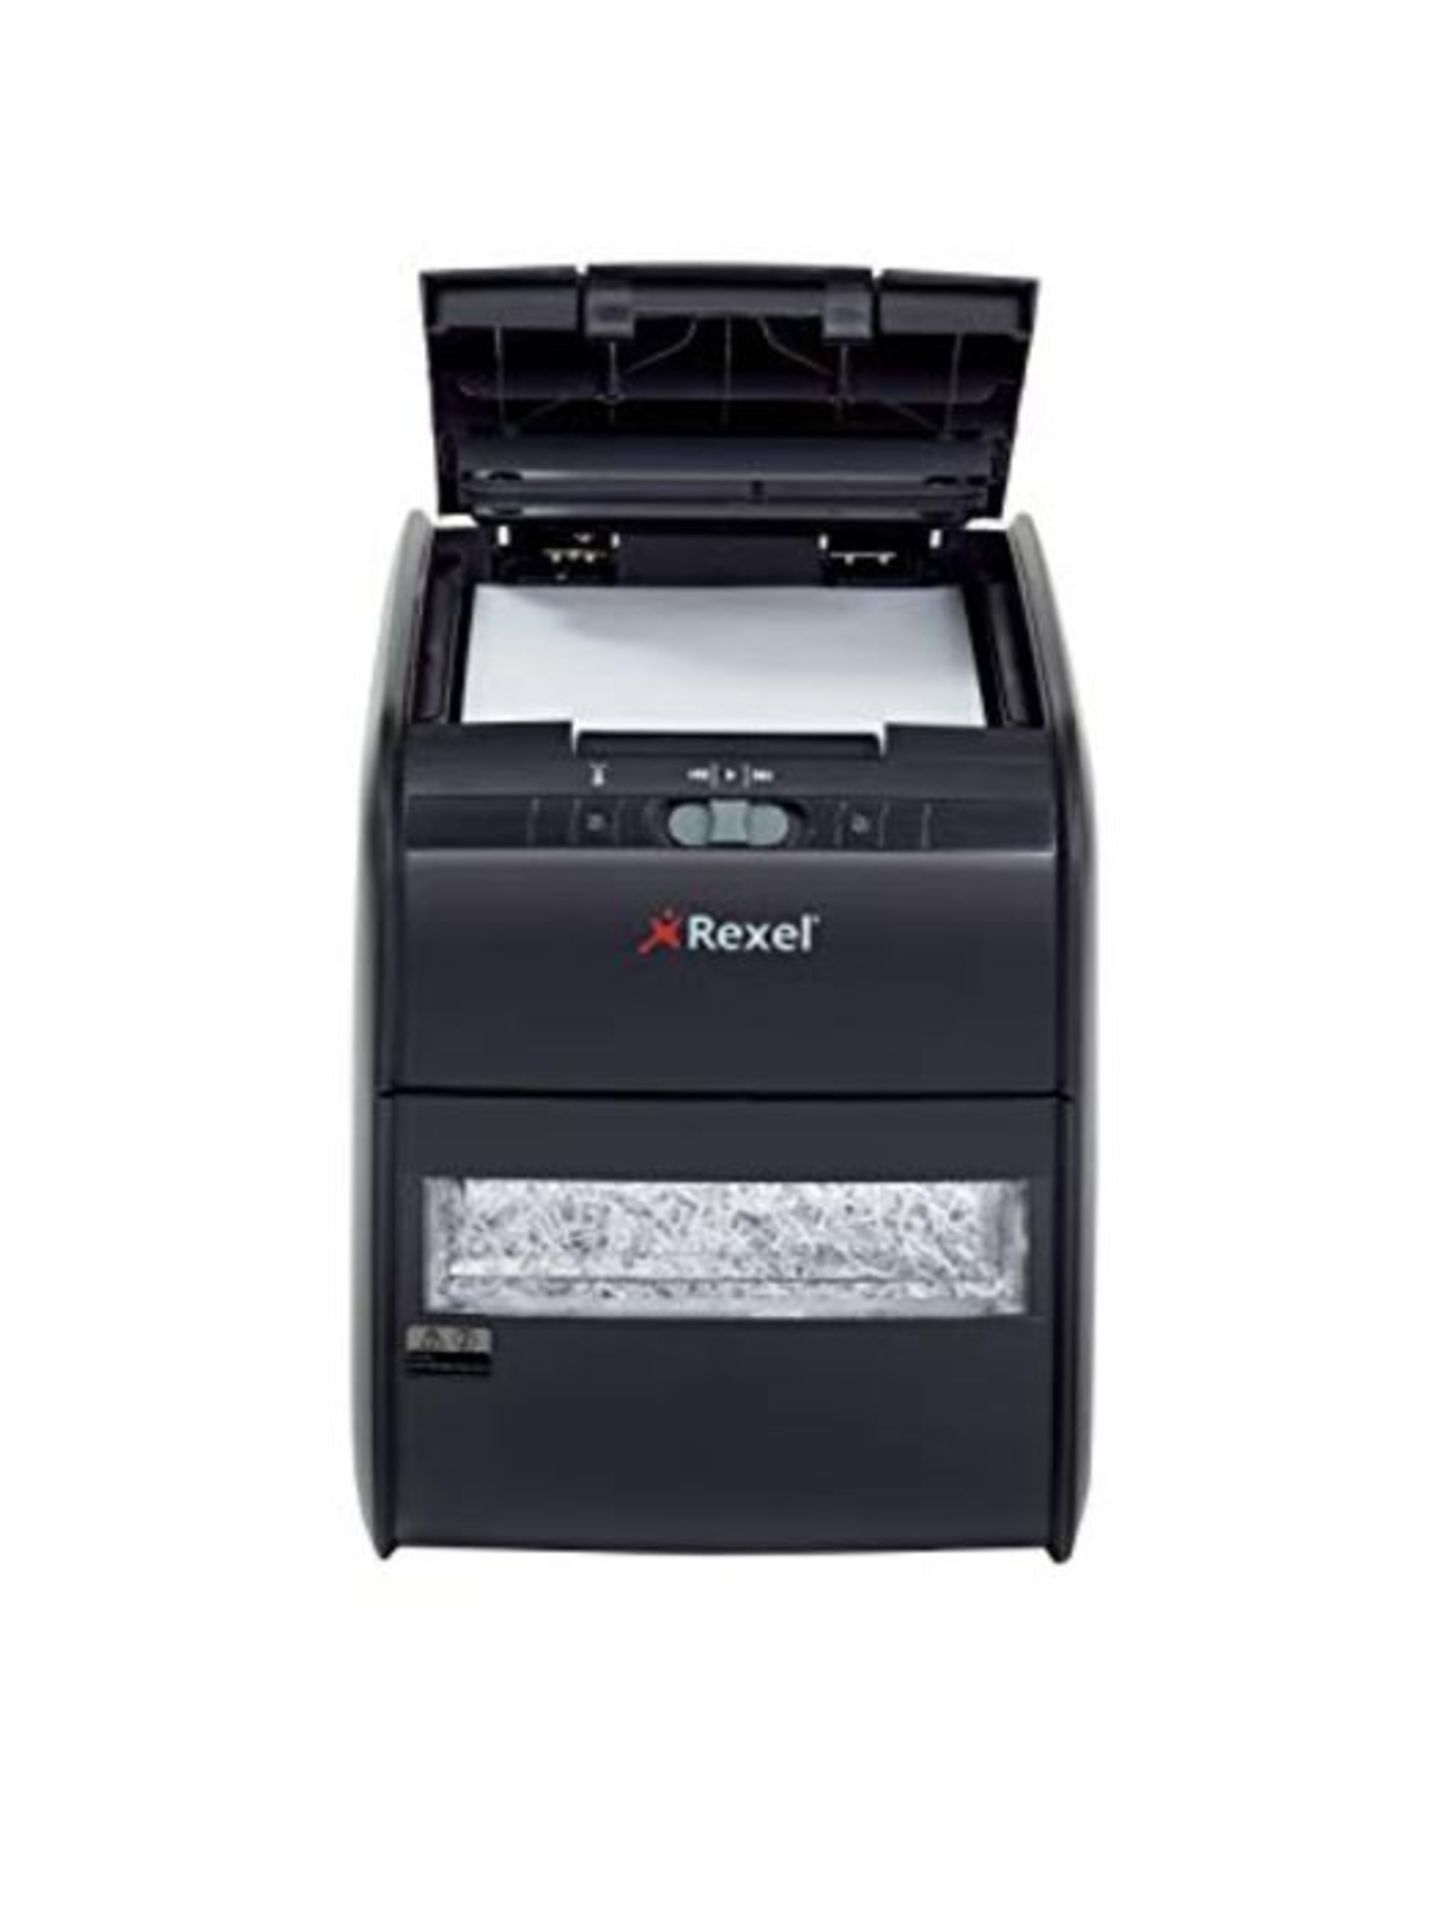 RRP £109.00 Rexel Auto+ 60X Auto Feed 30 Sheet Cross Cut Paper Shredder for Home or Home Office (o